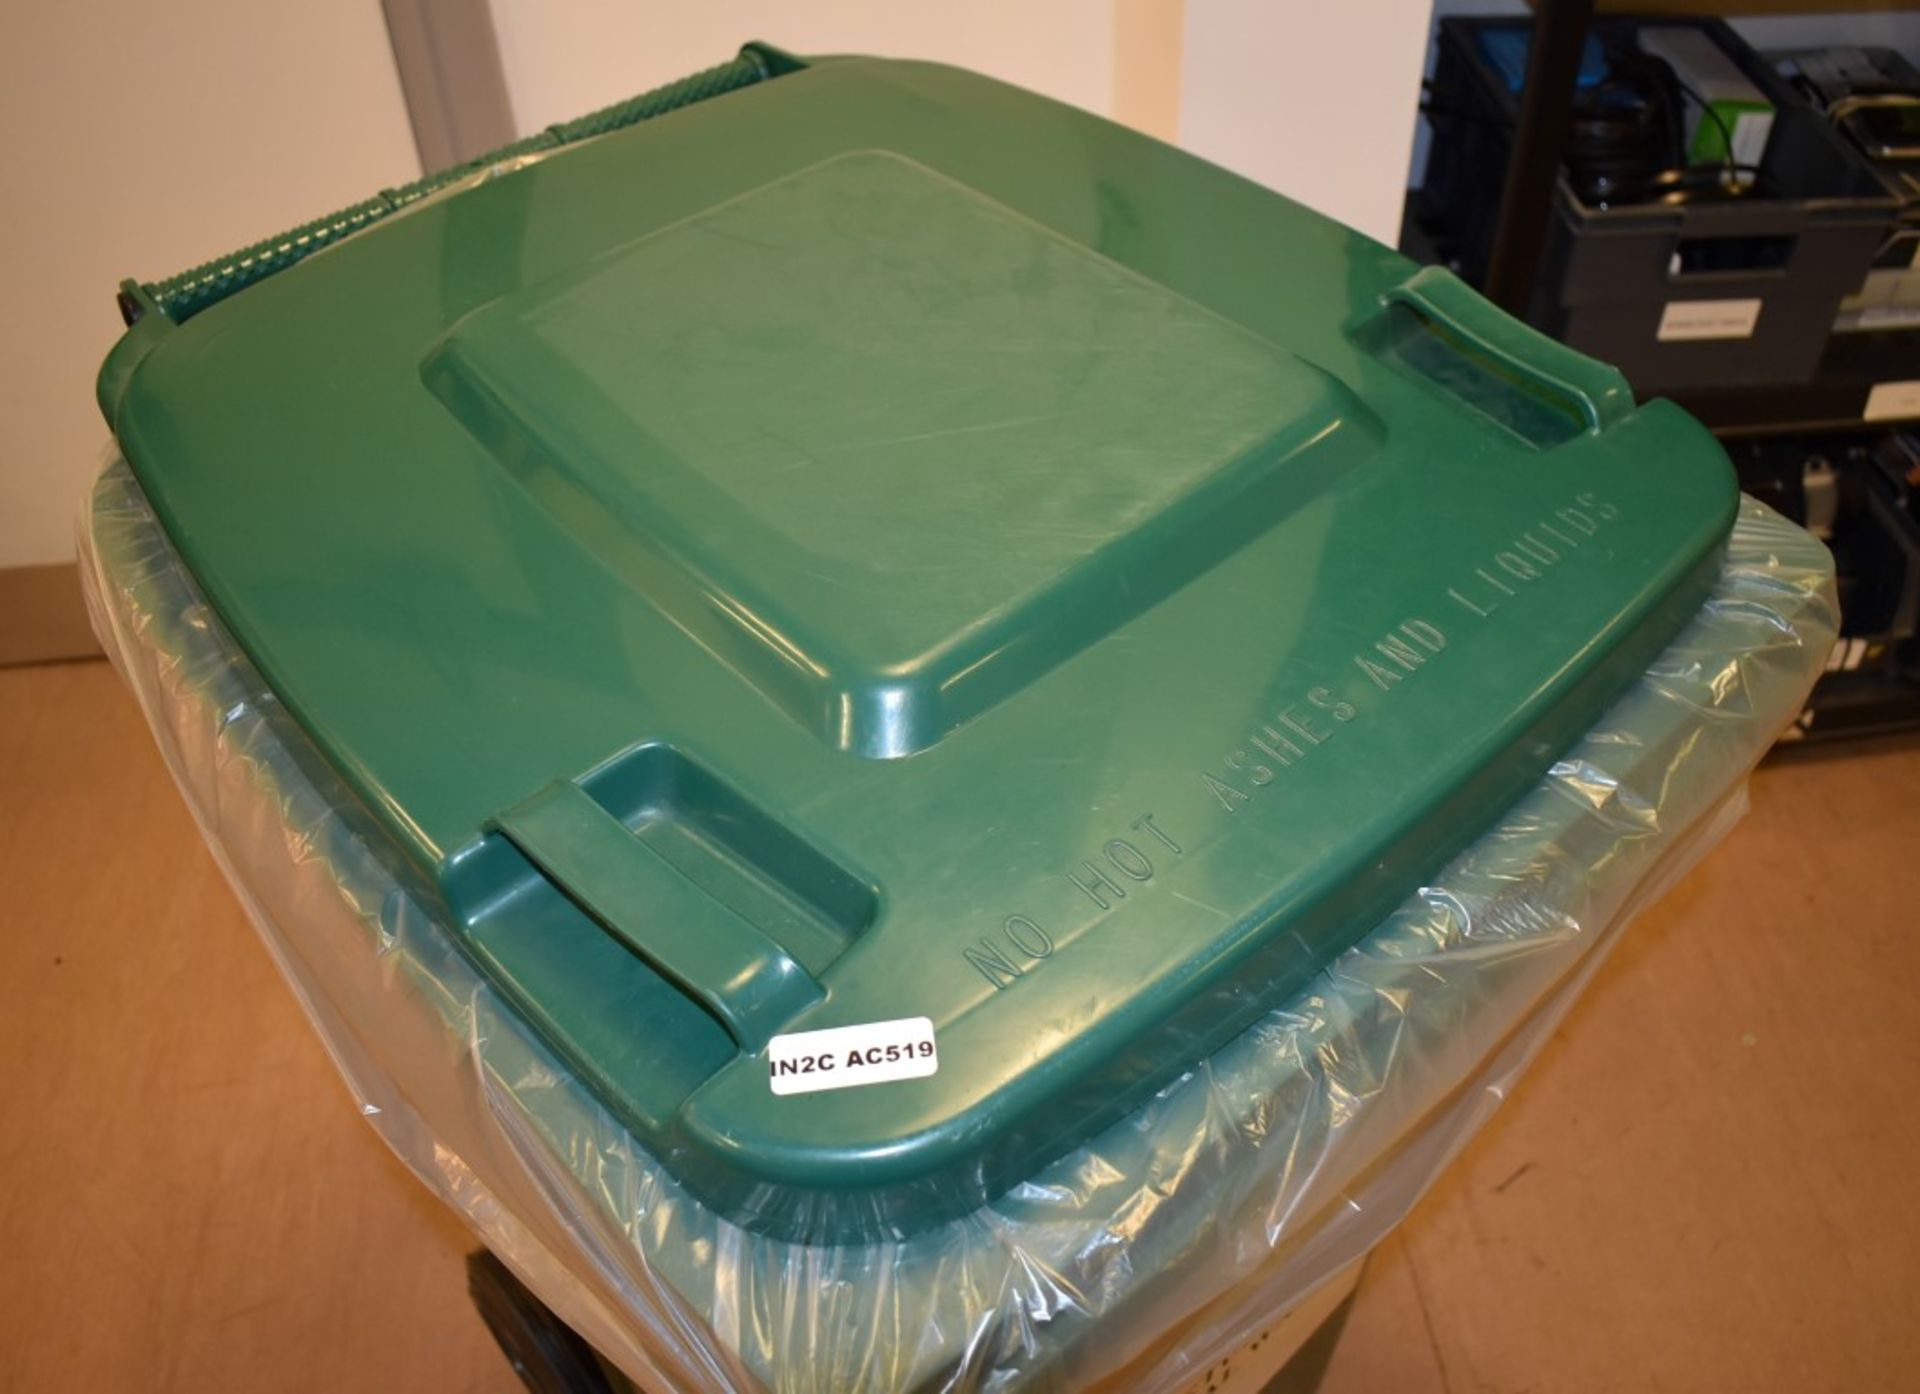 1 x Wheelie Waste Bin in Green - 240 Litre - Previously Used Indoors Only - Good Clean Condition - Image 2 of 3